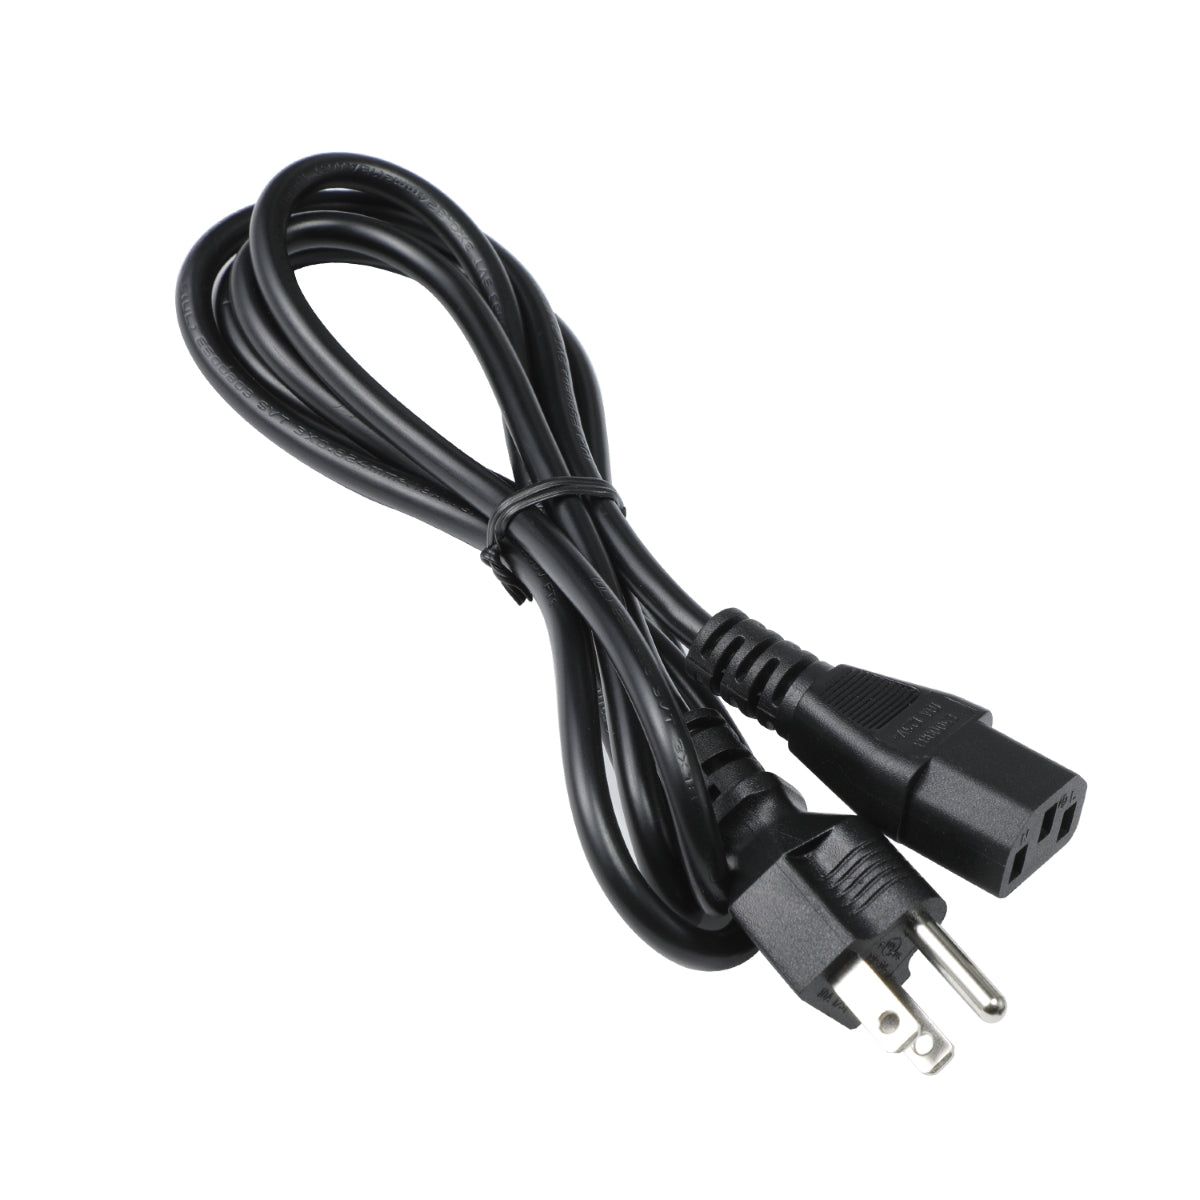 Power Cord for HP Pavilion Power 580-010 Computer.